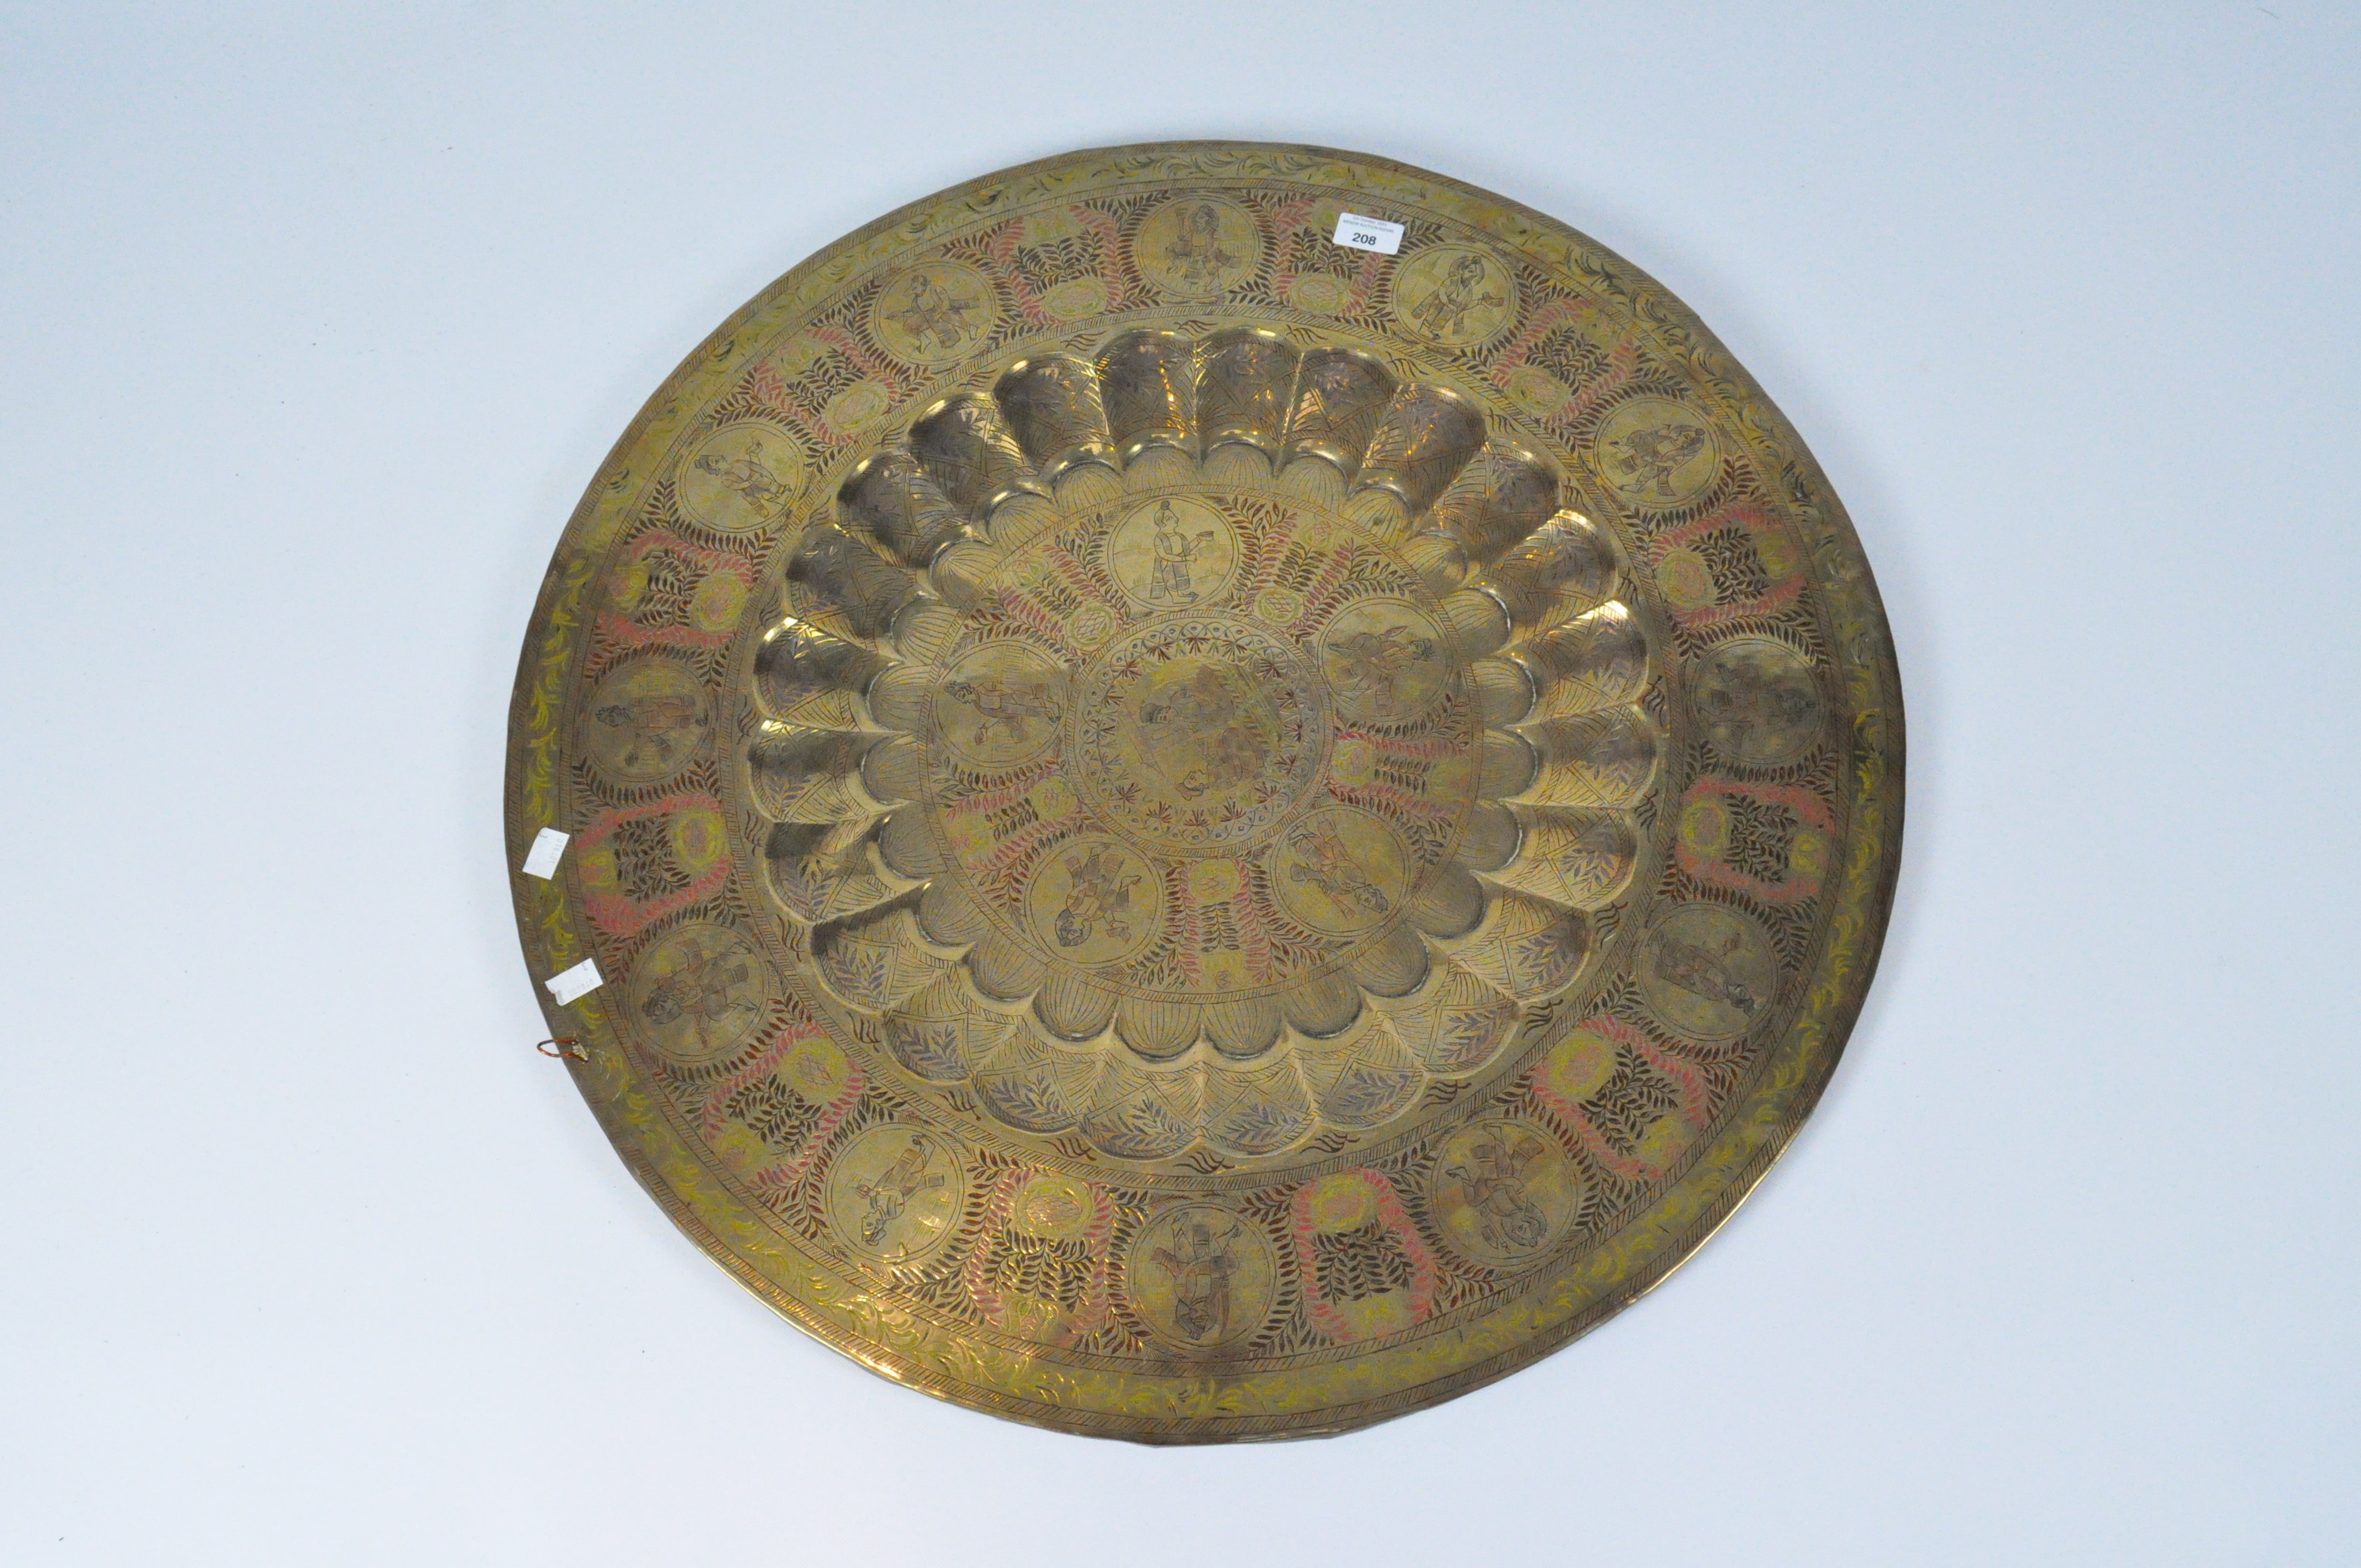 A Persian style brass table top or charger, engraved with figures and leaves,